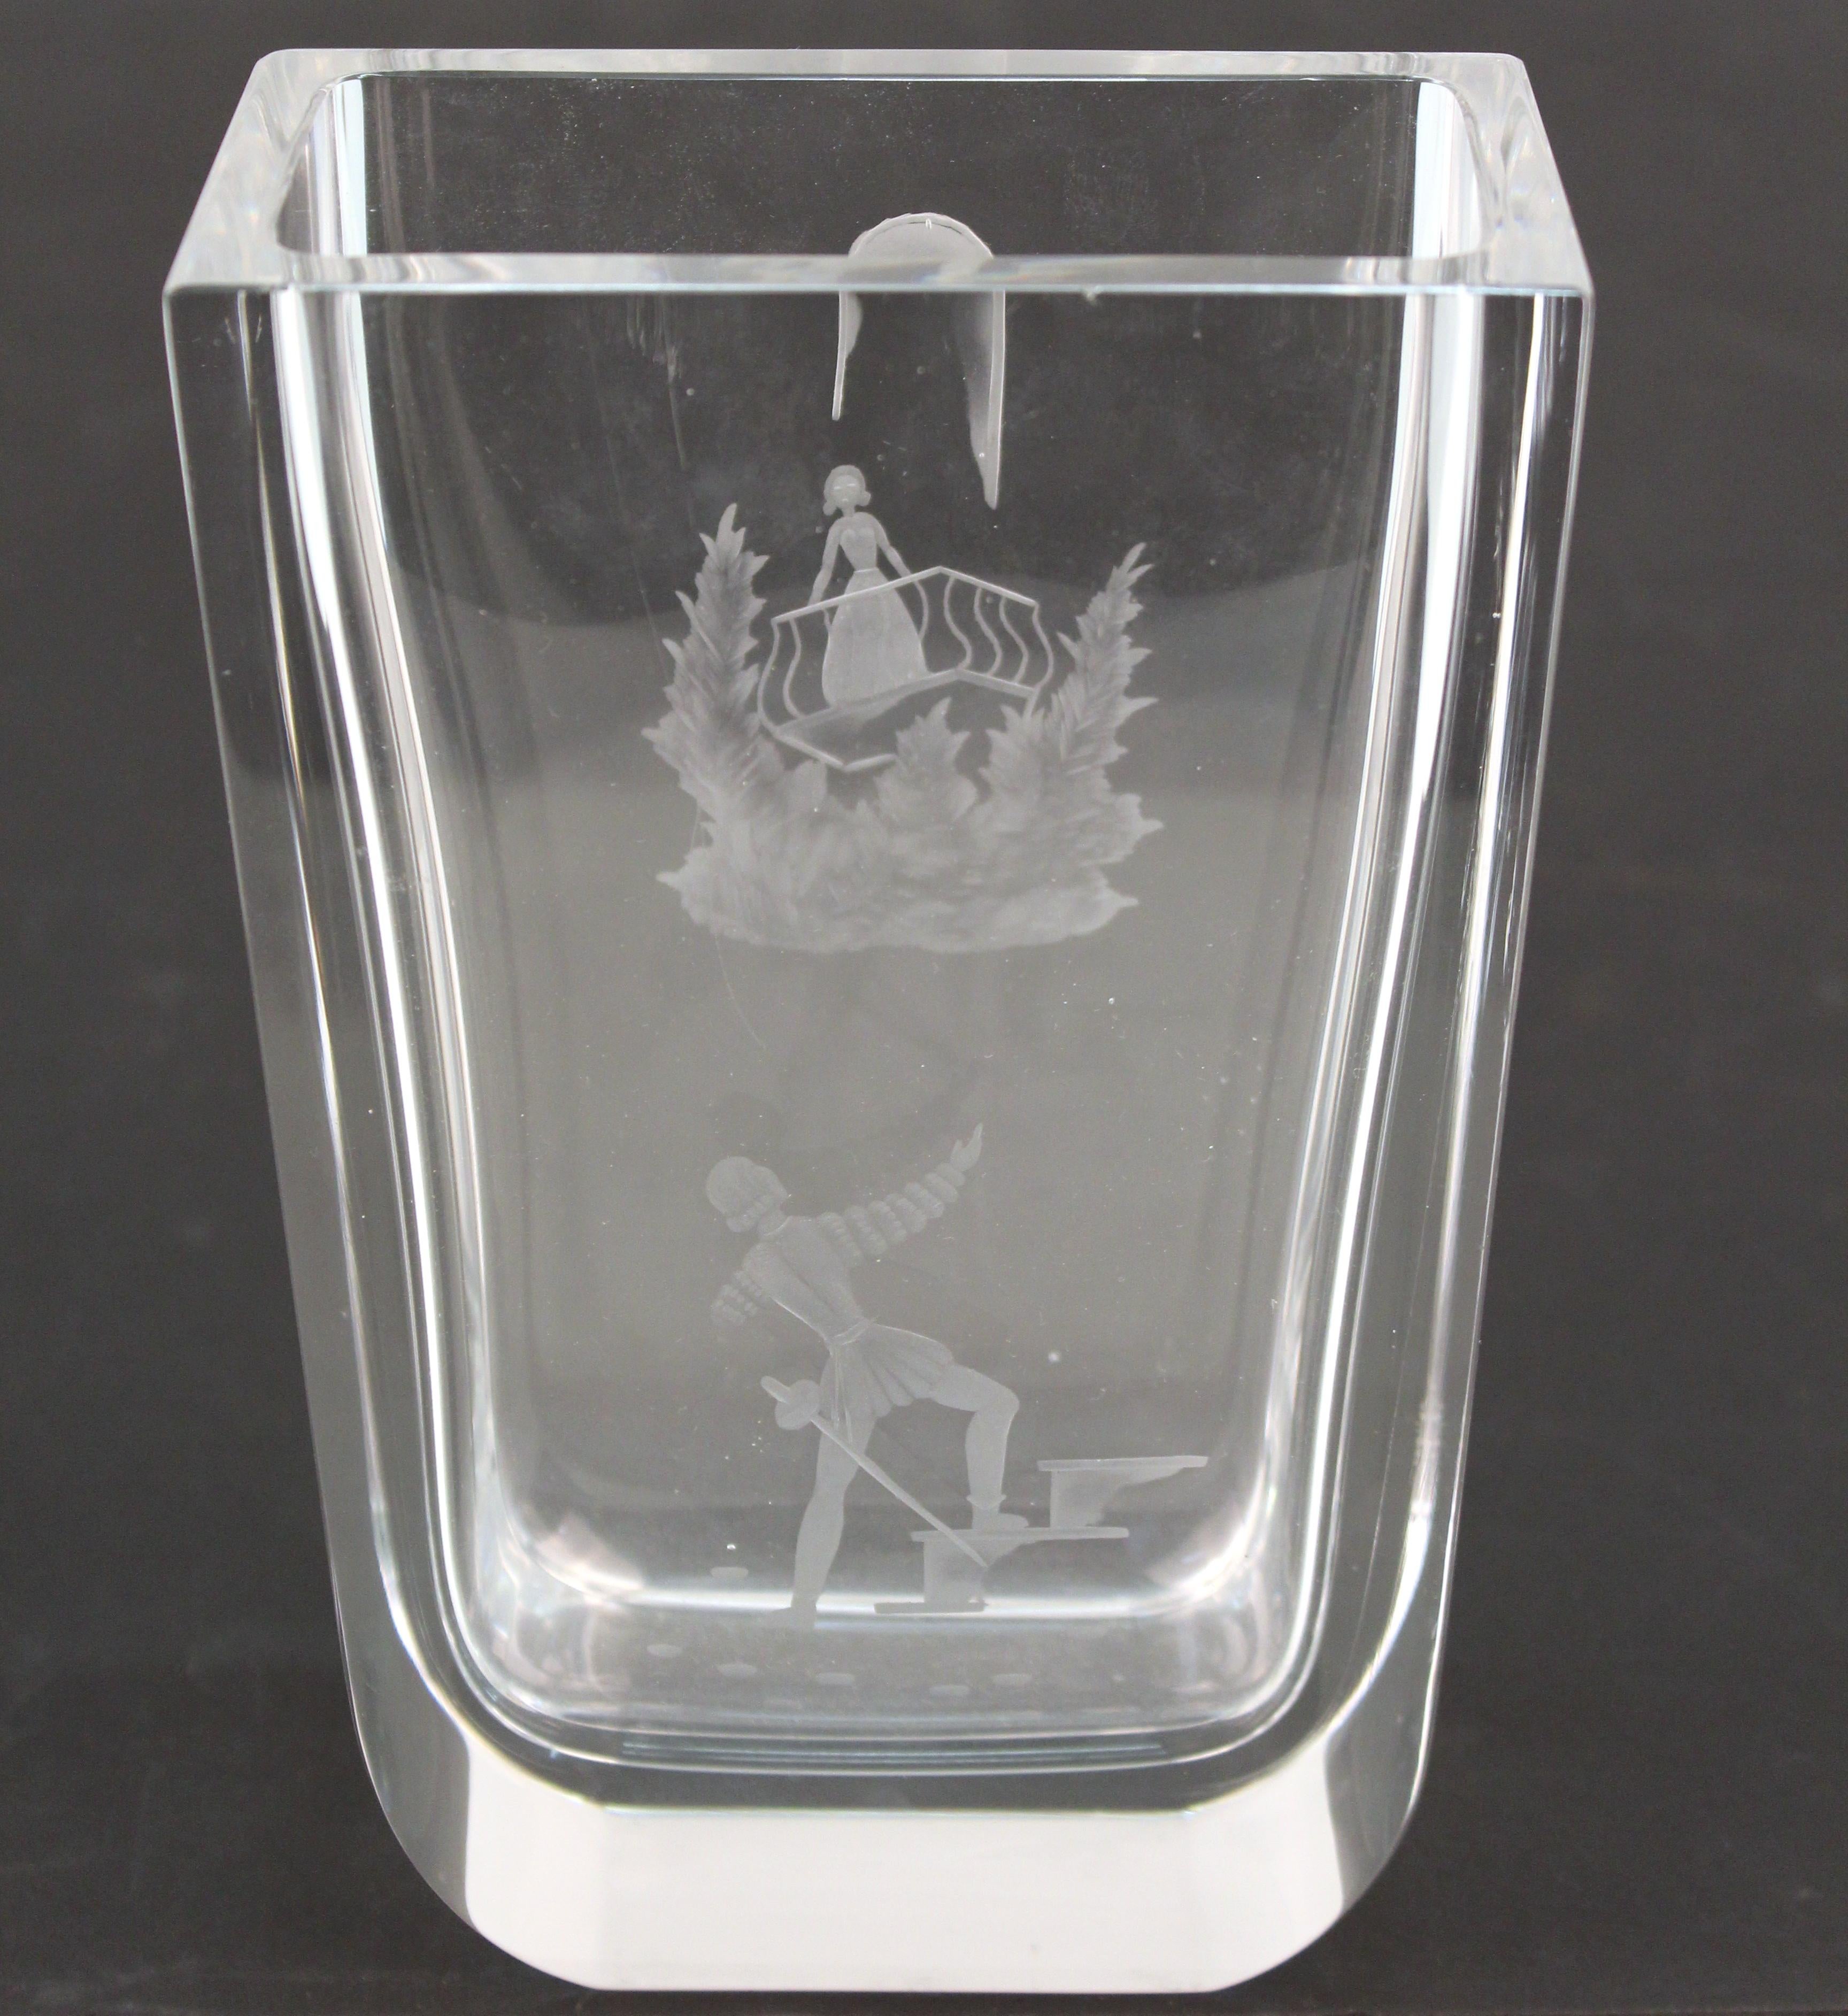 Mid-Century Modern heavy glass vase with an etched vignette depicting the balcony scene from Romeo & Juliet, one character being etched on the front, and one on the back of the vase, creating an illusion of depth to the scene. The piece is in great